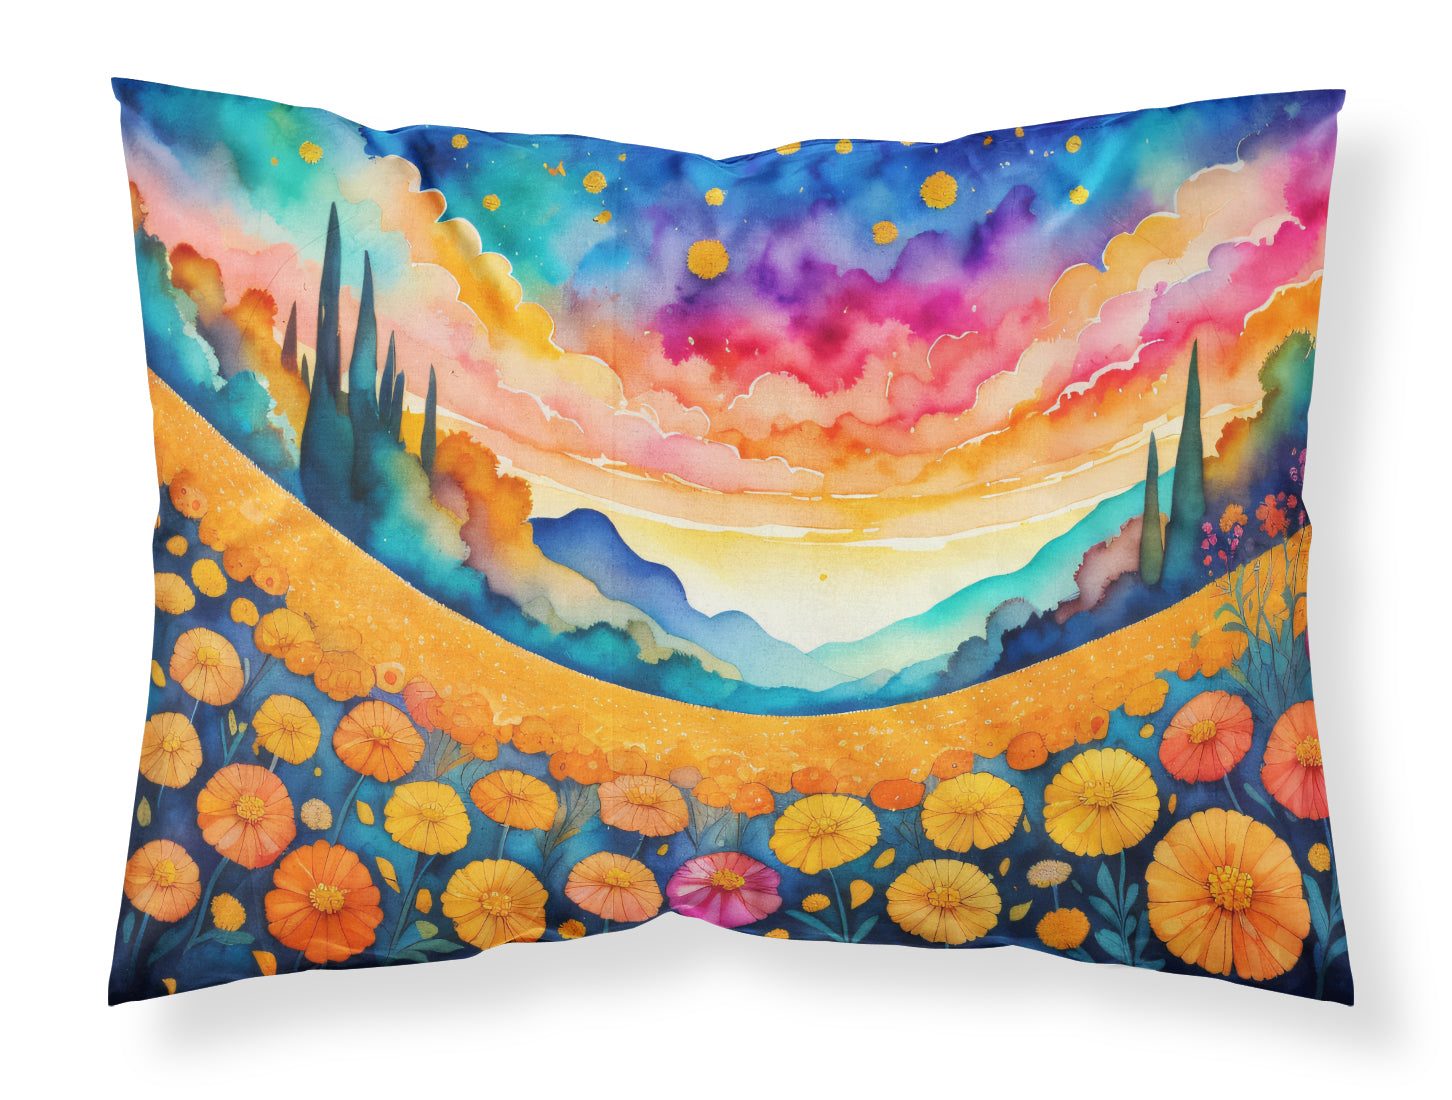 Buy this Marigolds in Color Fabric Standard Pillowcase